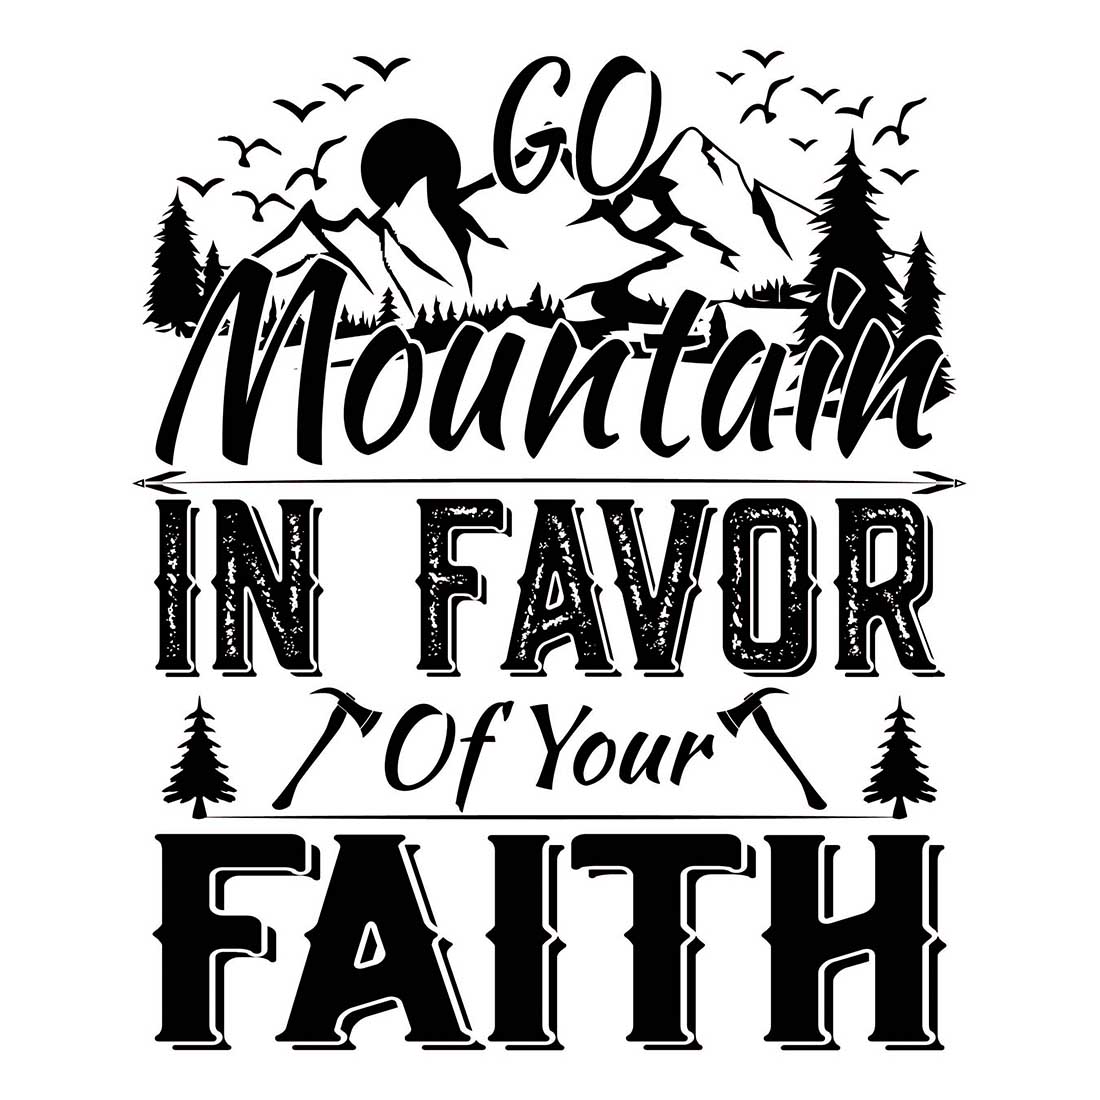 Go Mountain in favor of your Faith Camping SVG T-Shirt Design |Camping Mountain Hike T-Shirt Design | Ai, Svg, Eps, Dxf, Jpeg, Png, Instant download T-Shirt Digital Prints file preview image.